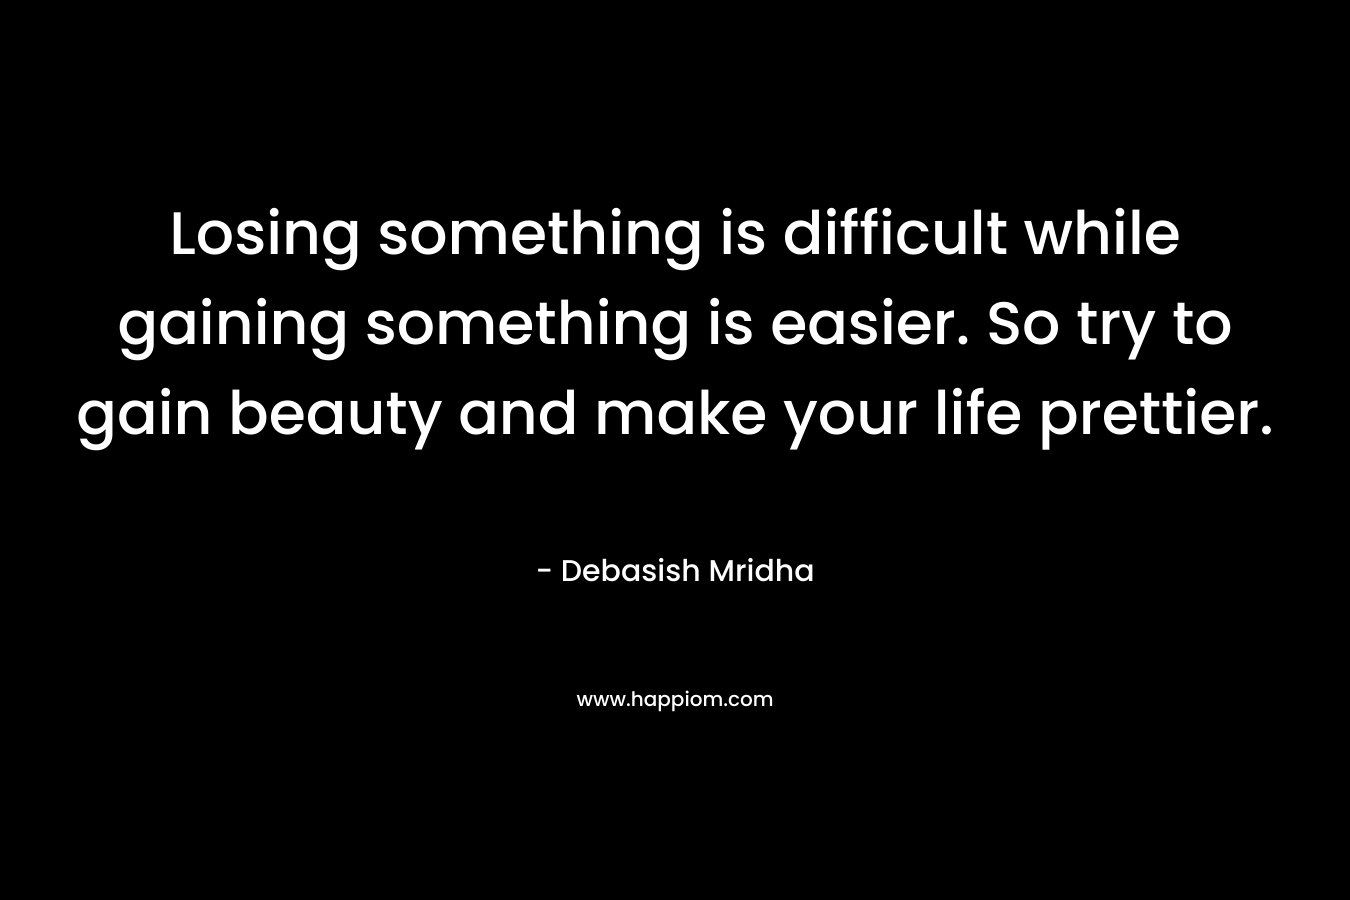 Losing something is difficult while gaining something is easier. So try to gain beauty and make your life prettier. – Debasish Mridha